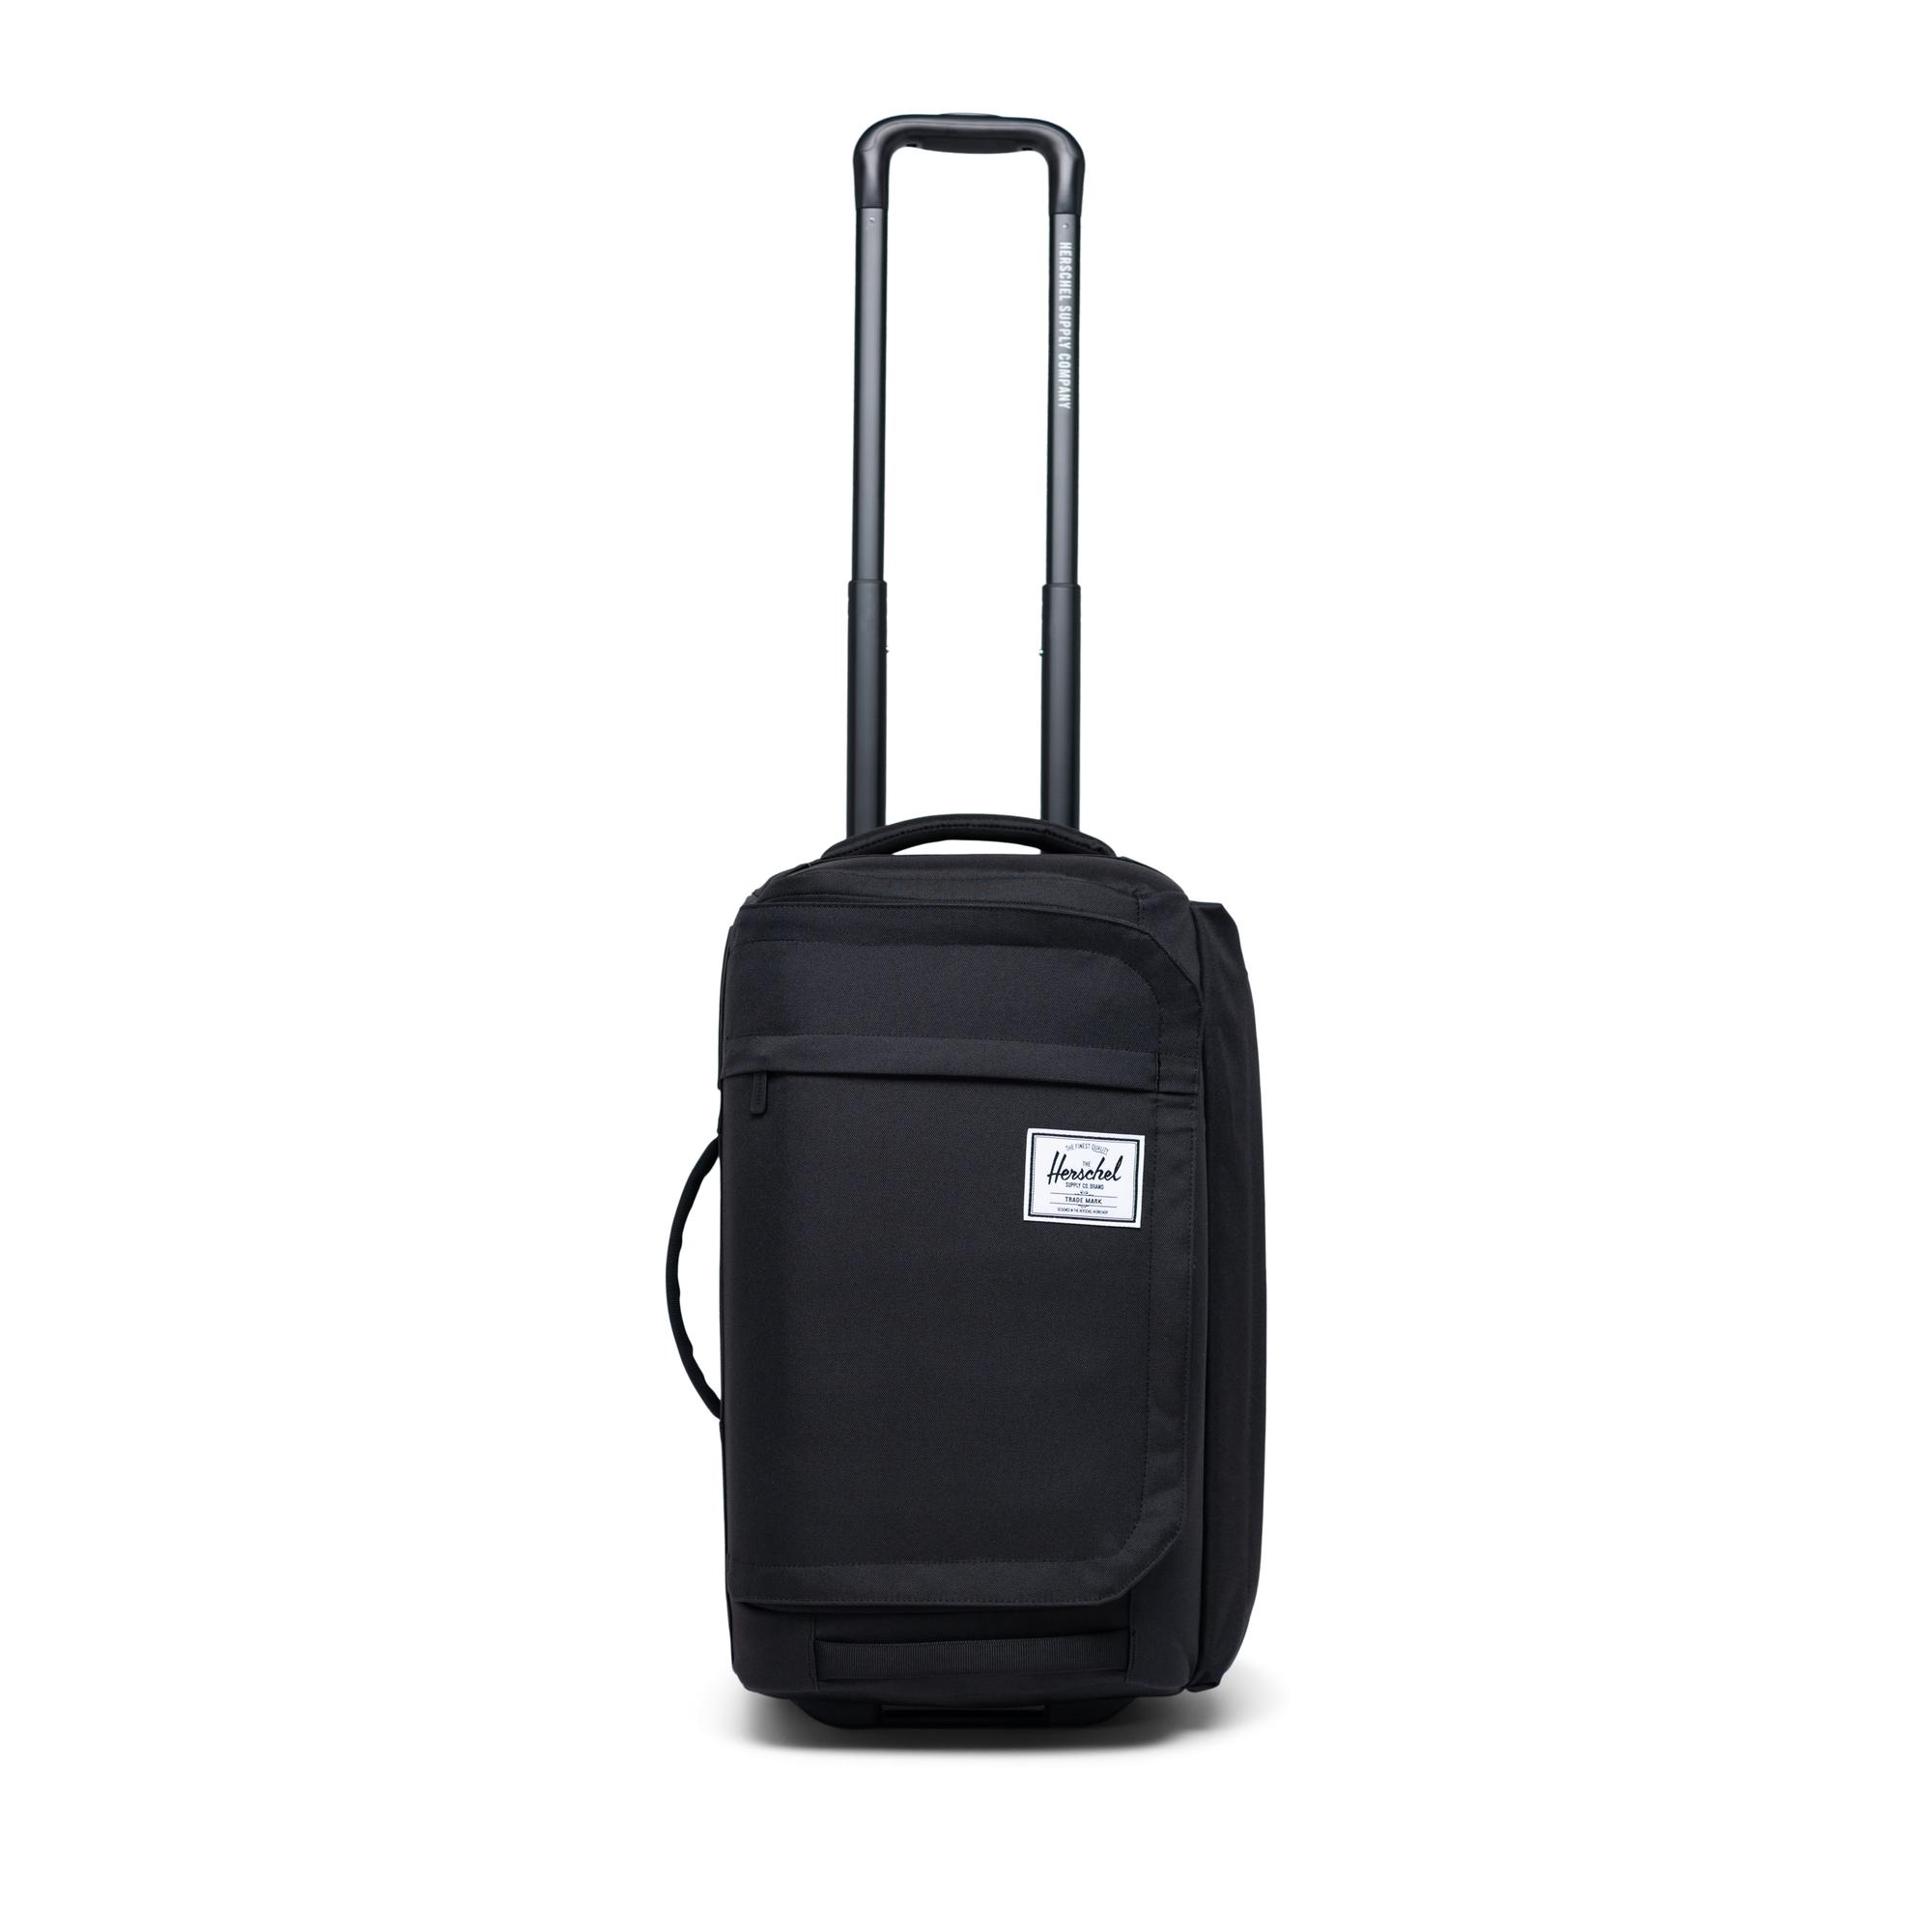 Outfitter Wheelie Luggage 30L | Herschel Supply Company